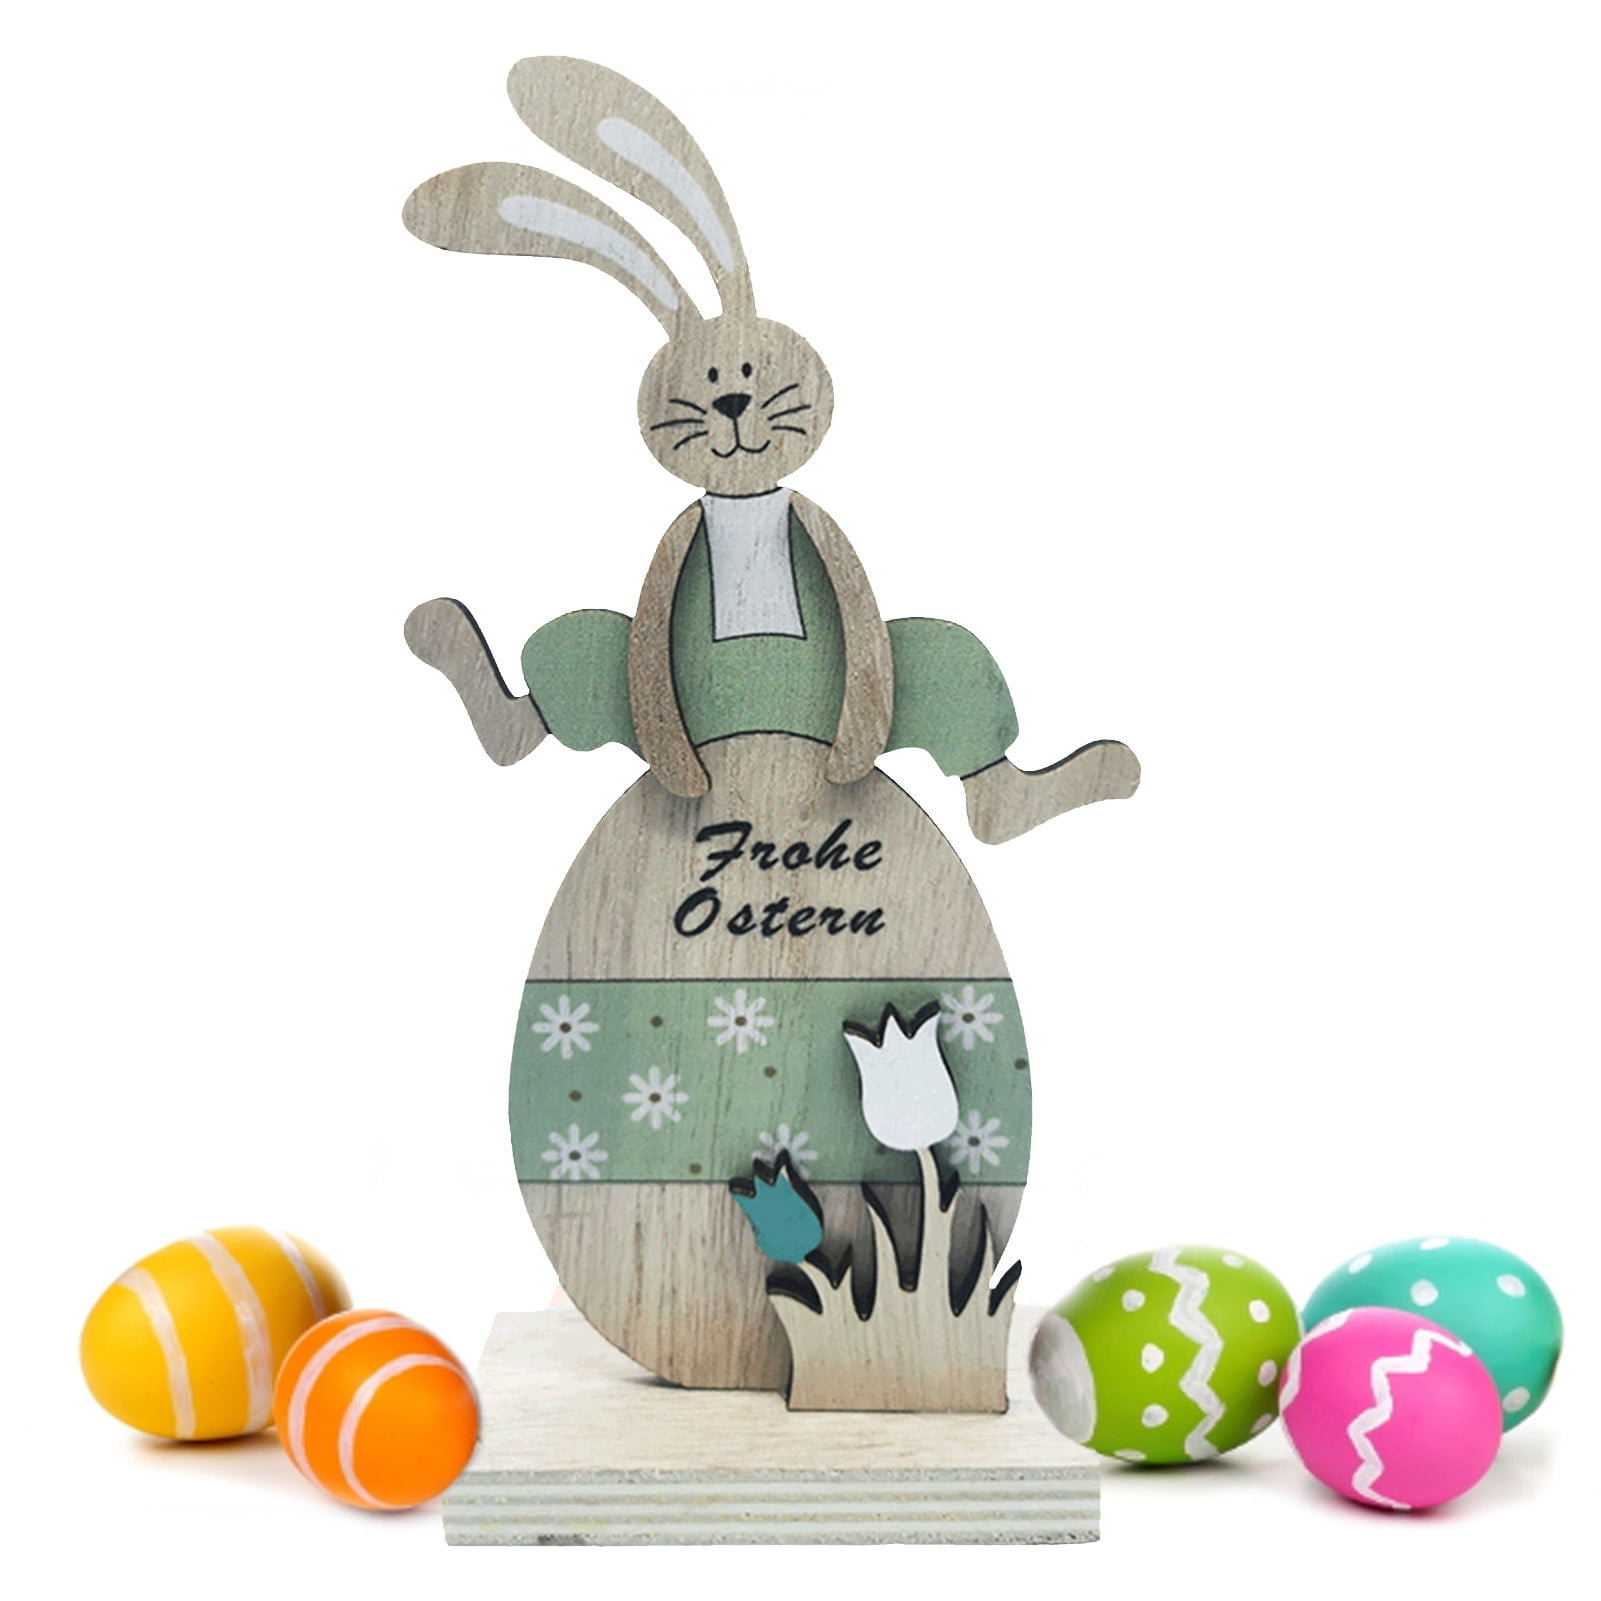 Details about   Wooden Rabbit Bunny Table Ornament Home Offices Easter Gift Festival Decoration* 